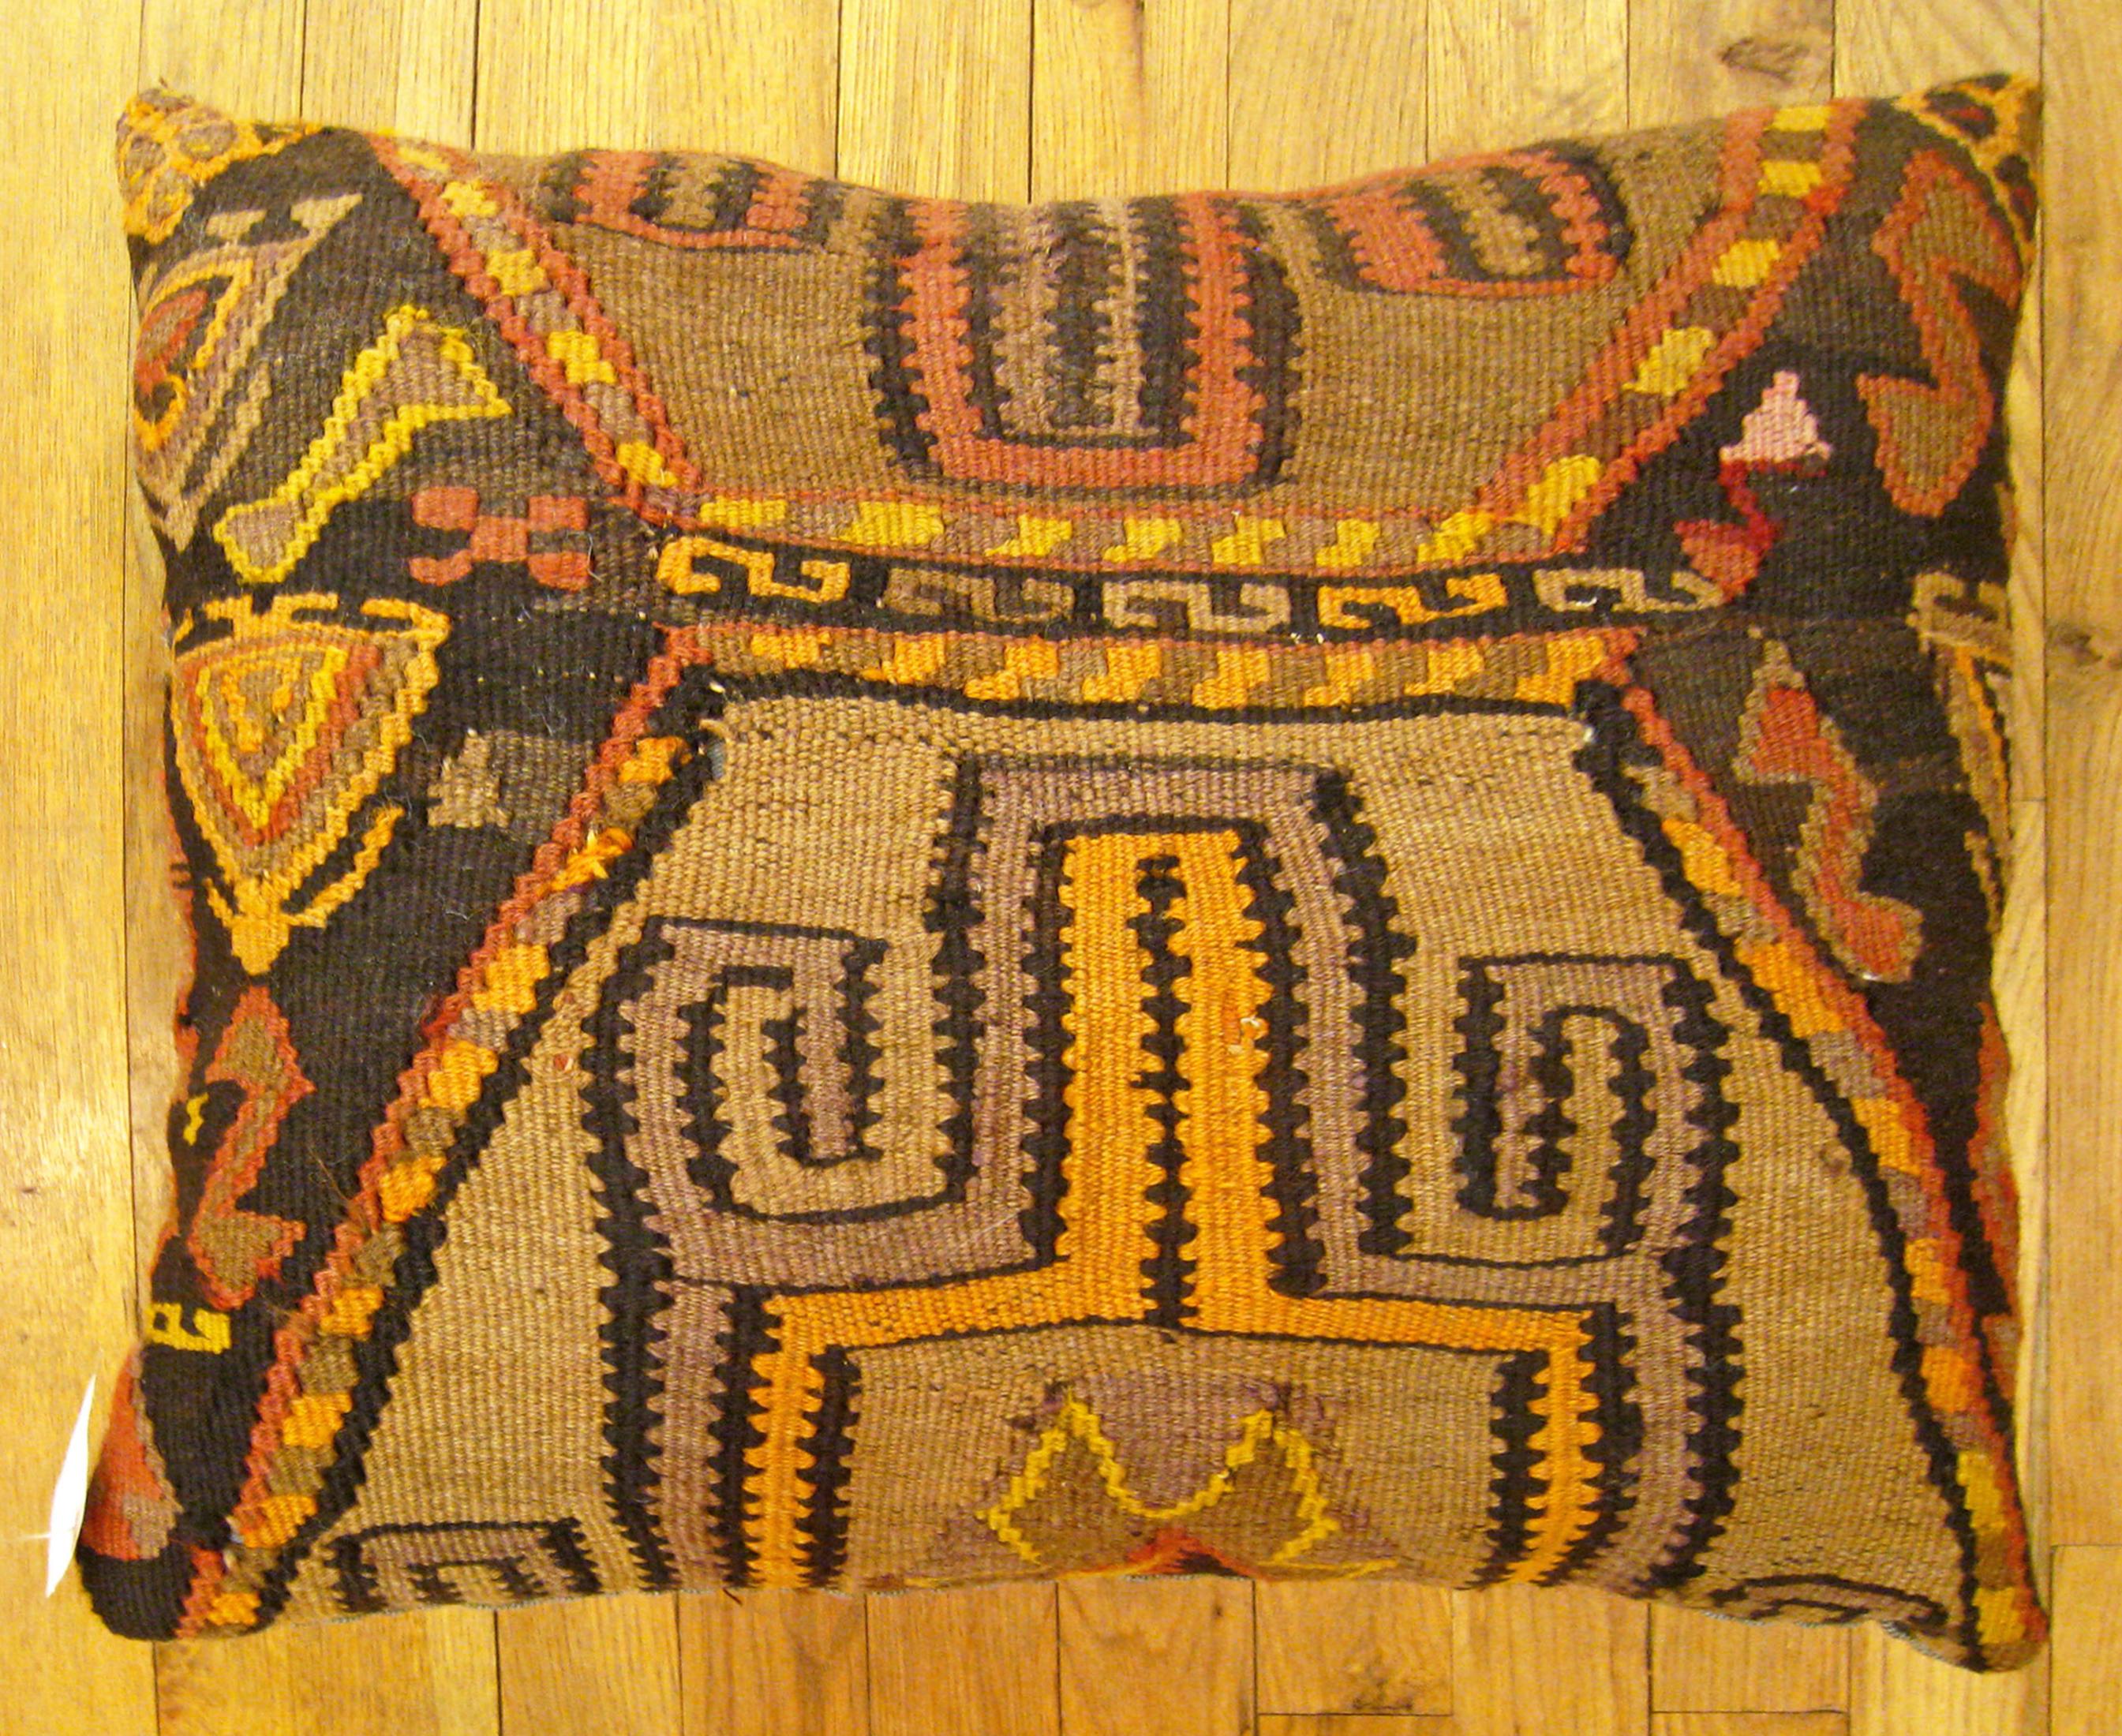 Vintage Turkish Kilim Rug Pillow; size 22” x 18”.

A vintage decorative pillow with geometric abstracts allover a brown central field, size 22” x 18”. This lovely decorative pillow features a vintage fabric of a KIilim carpet on front which is